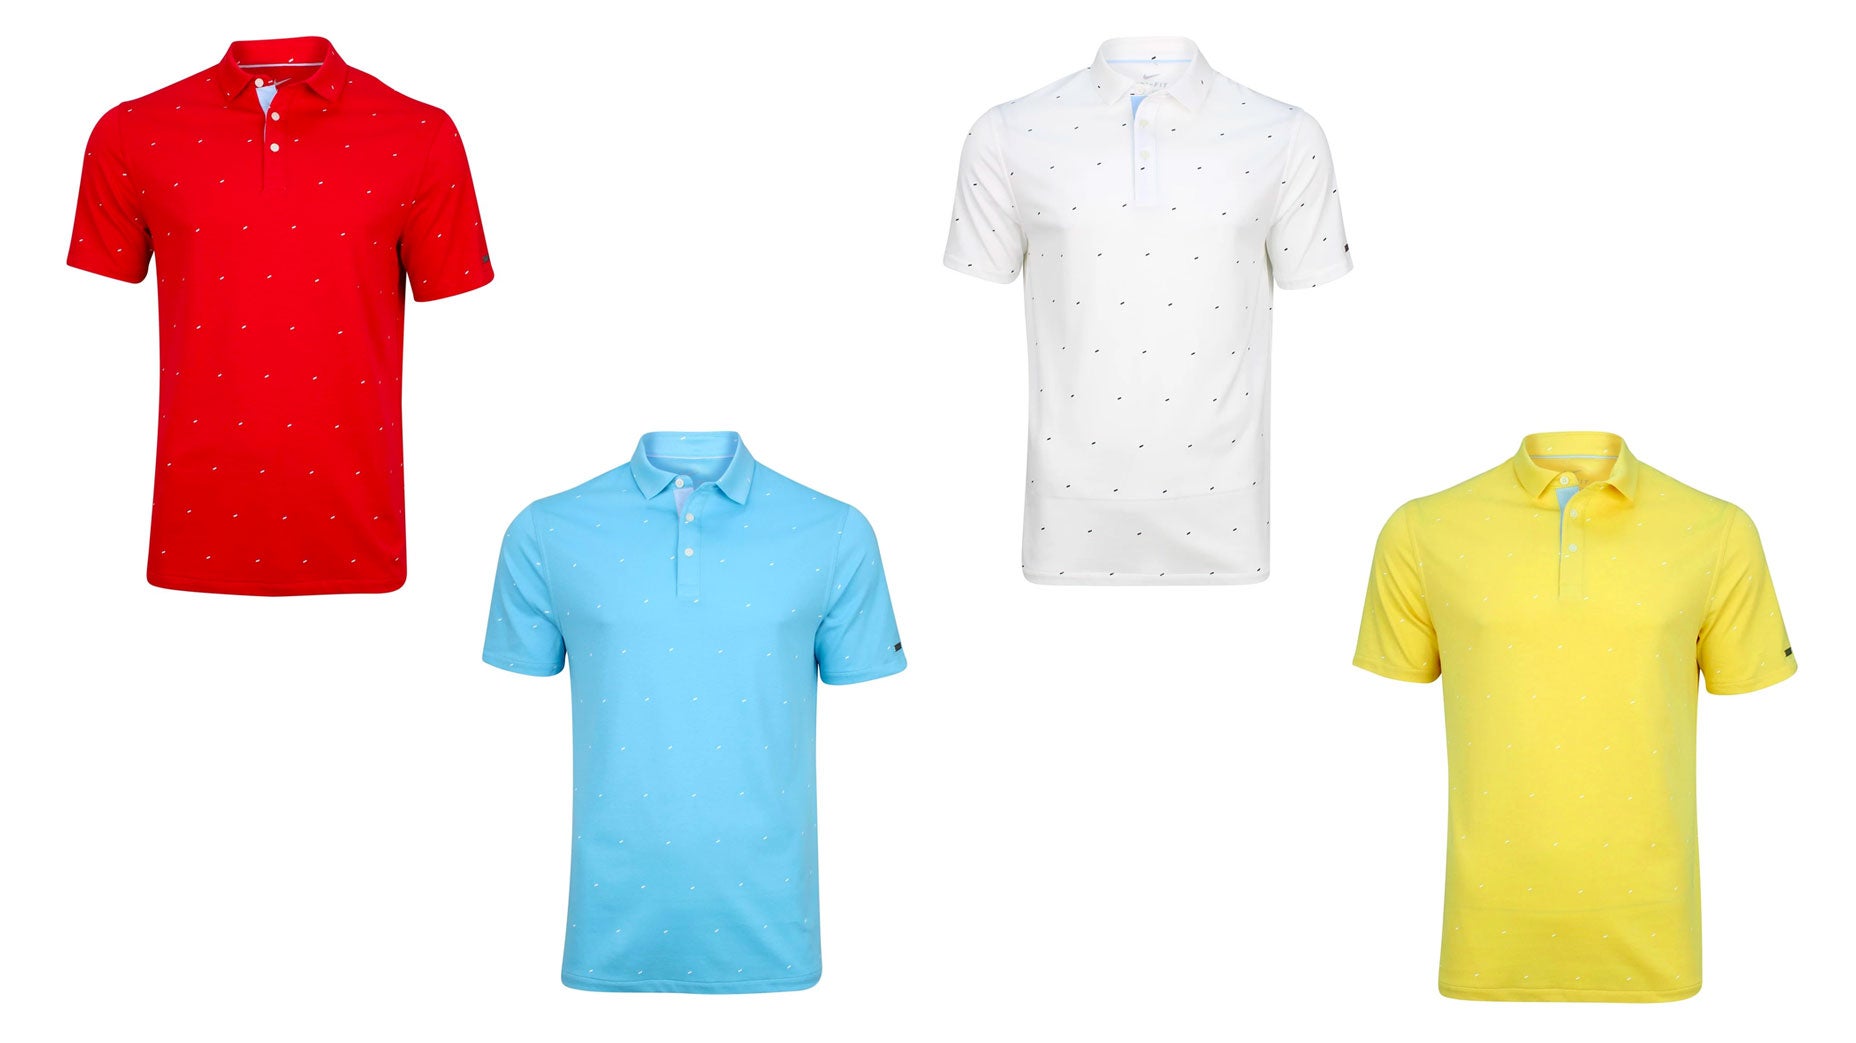 We love these printed Nike polos